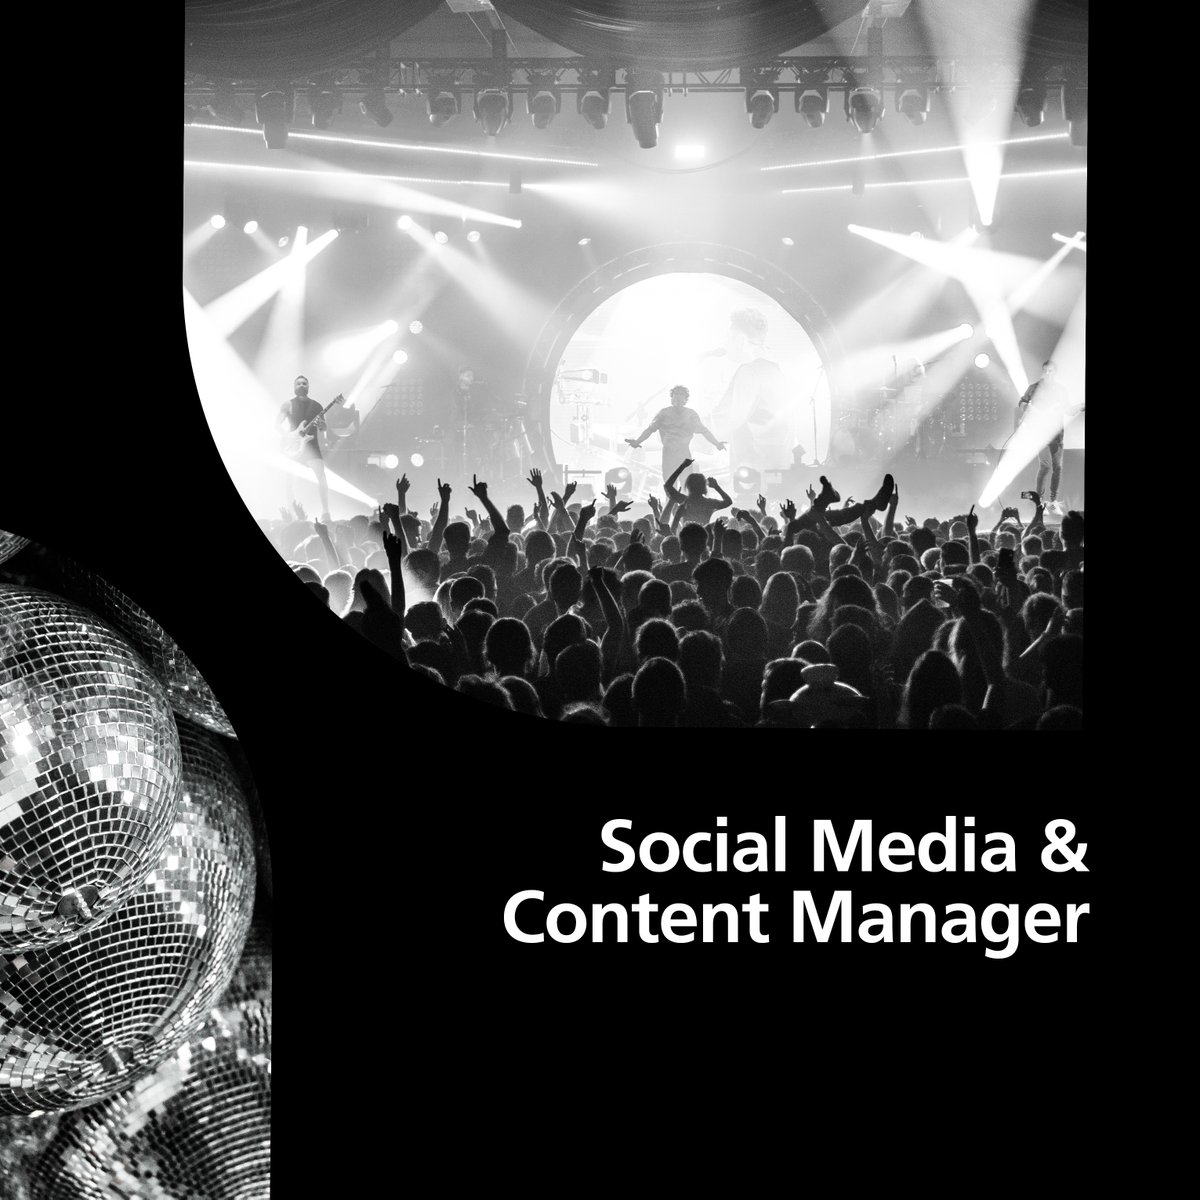 WE ARE HIRING - Do you will have a strong understanding of social media platforms and multiple accounts? Are you fully immersed in creative and strategic output to provide best-in-class social content? Find out more and apply here - bit.ly/AMGSocialConte… Closes 22 April.